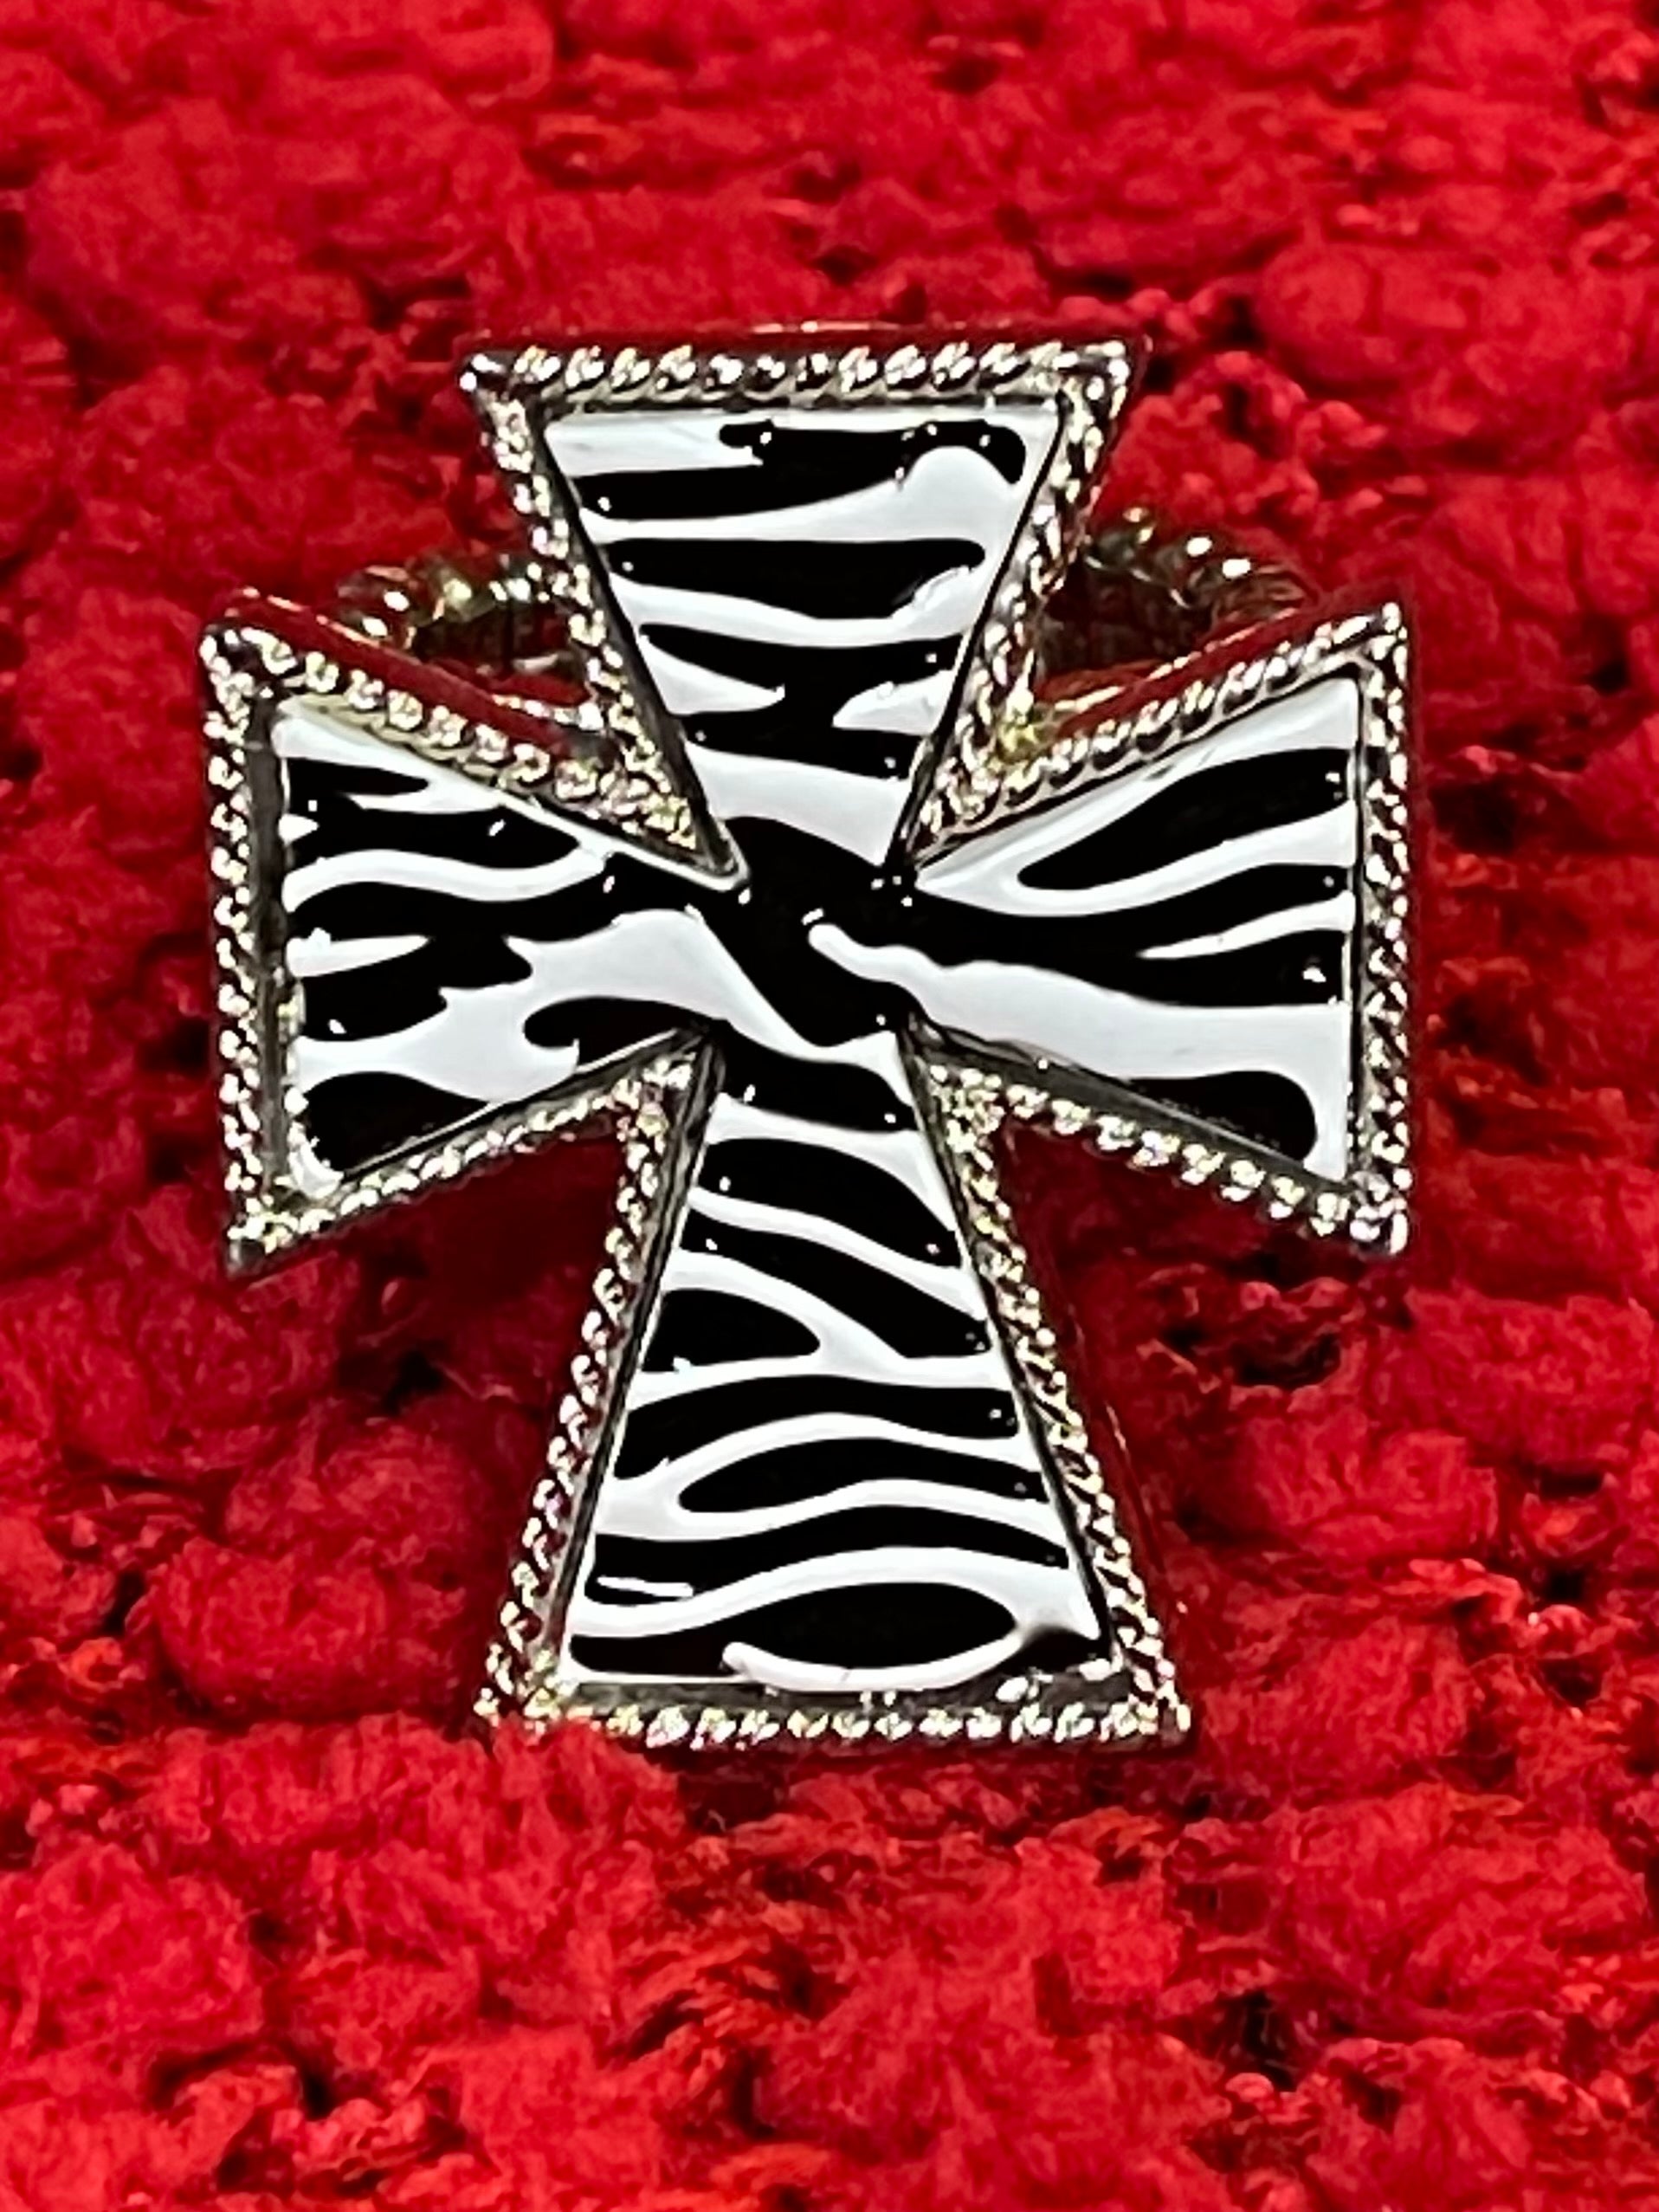 Zebra Stretchy Ring| ONLY 1 LEFT! - Giddy Up Glamour Boutique